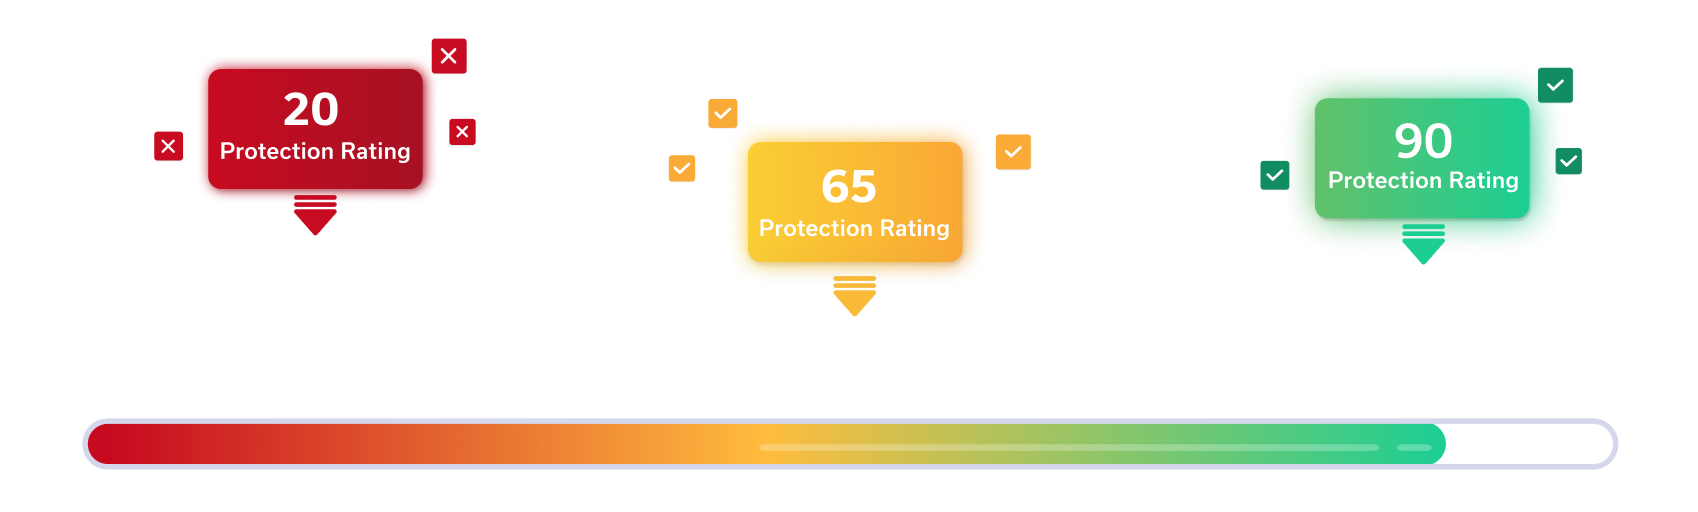 Discover your DDoS Vulnerabilities in 3 Minutes'. The image features three colored badges representing different security ratings for websites: a red badge with a rating of 20 for 'api.example.com', a yellow badge with a rating of 65 for 'login.example.com', and a green badge with a rating of 90 for 'kb.example.com'. Below the badges, a horizontal multicolored bar graph shows the range of protection ratings from 0 to 100.